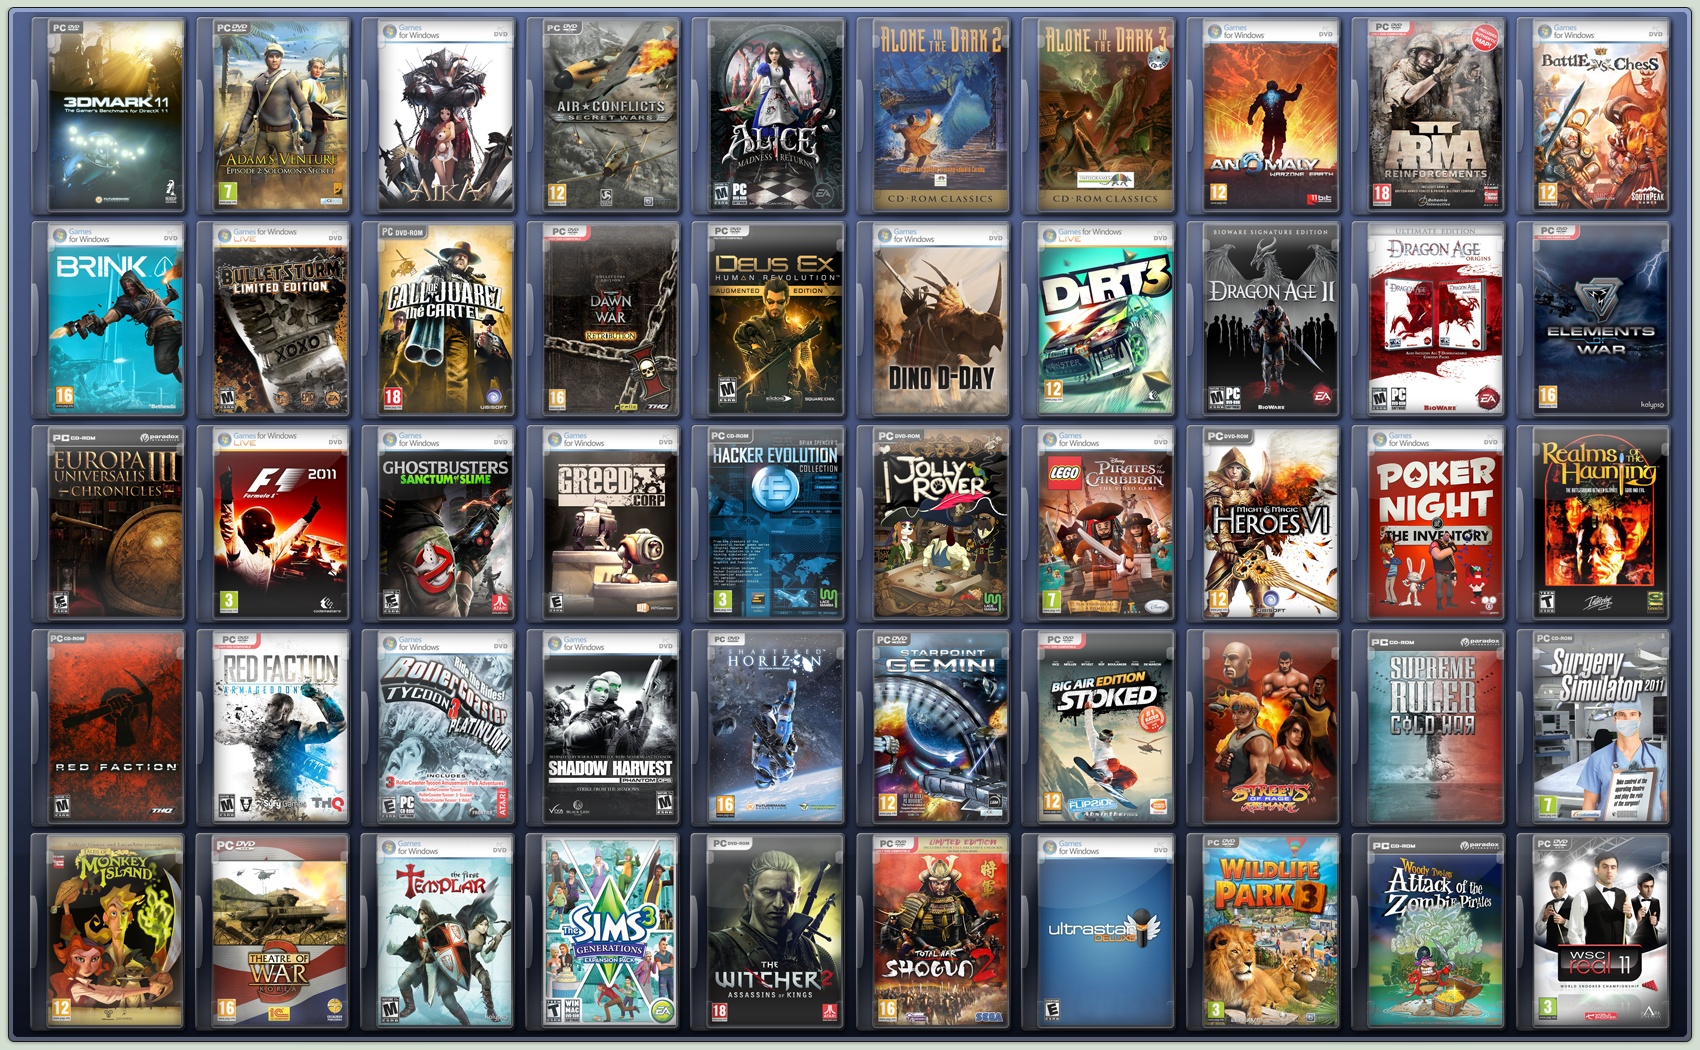 14 Computer Game Icons Images  PC Game Icons, PC Computer Games and PC Game Icon 